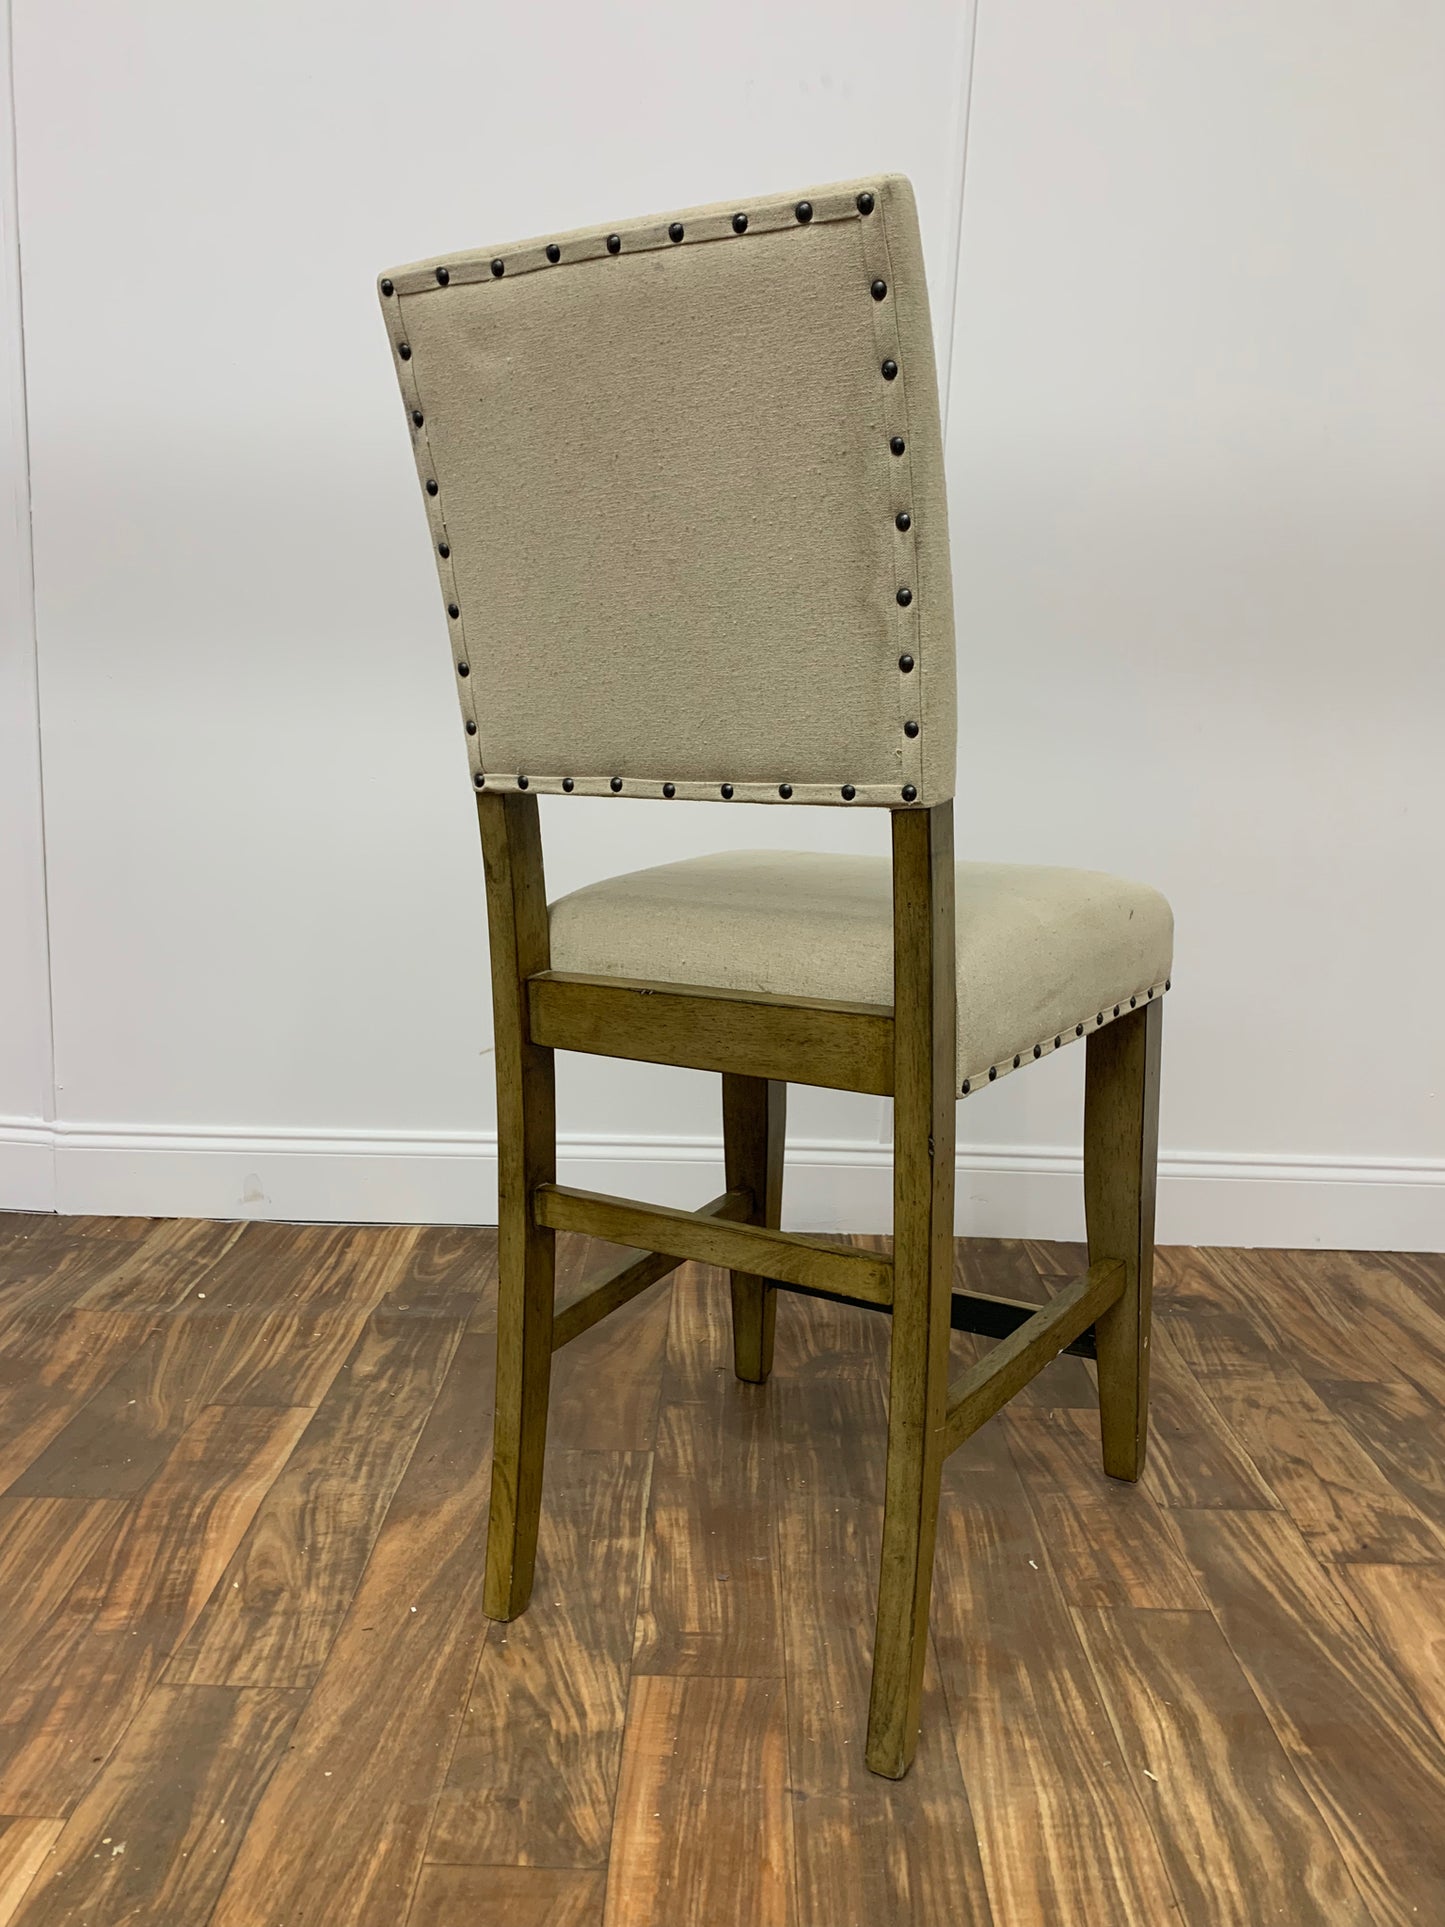 BEIGE BAR STOOL HIGH CHAIR WITH RIVETS